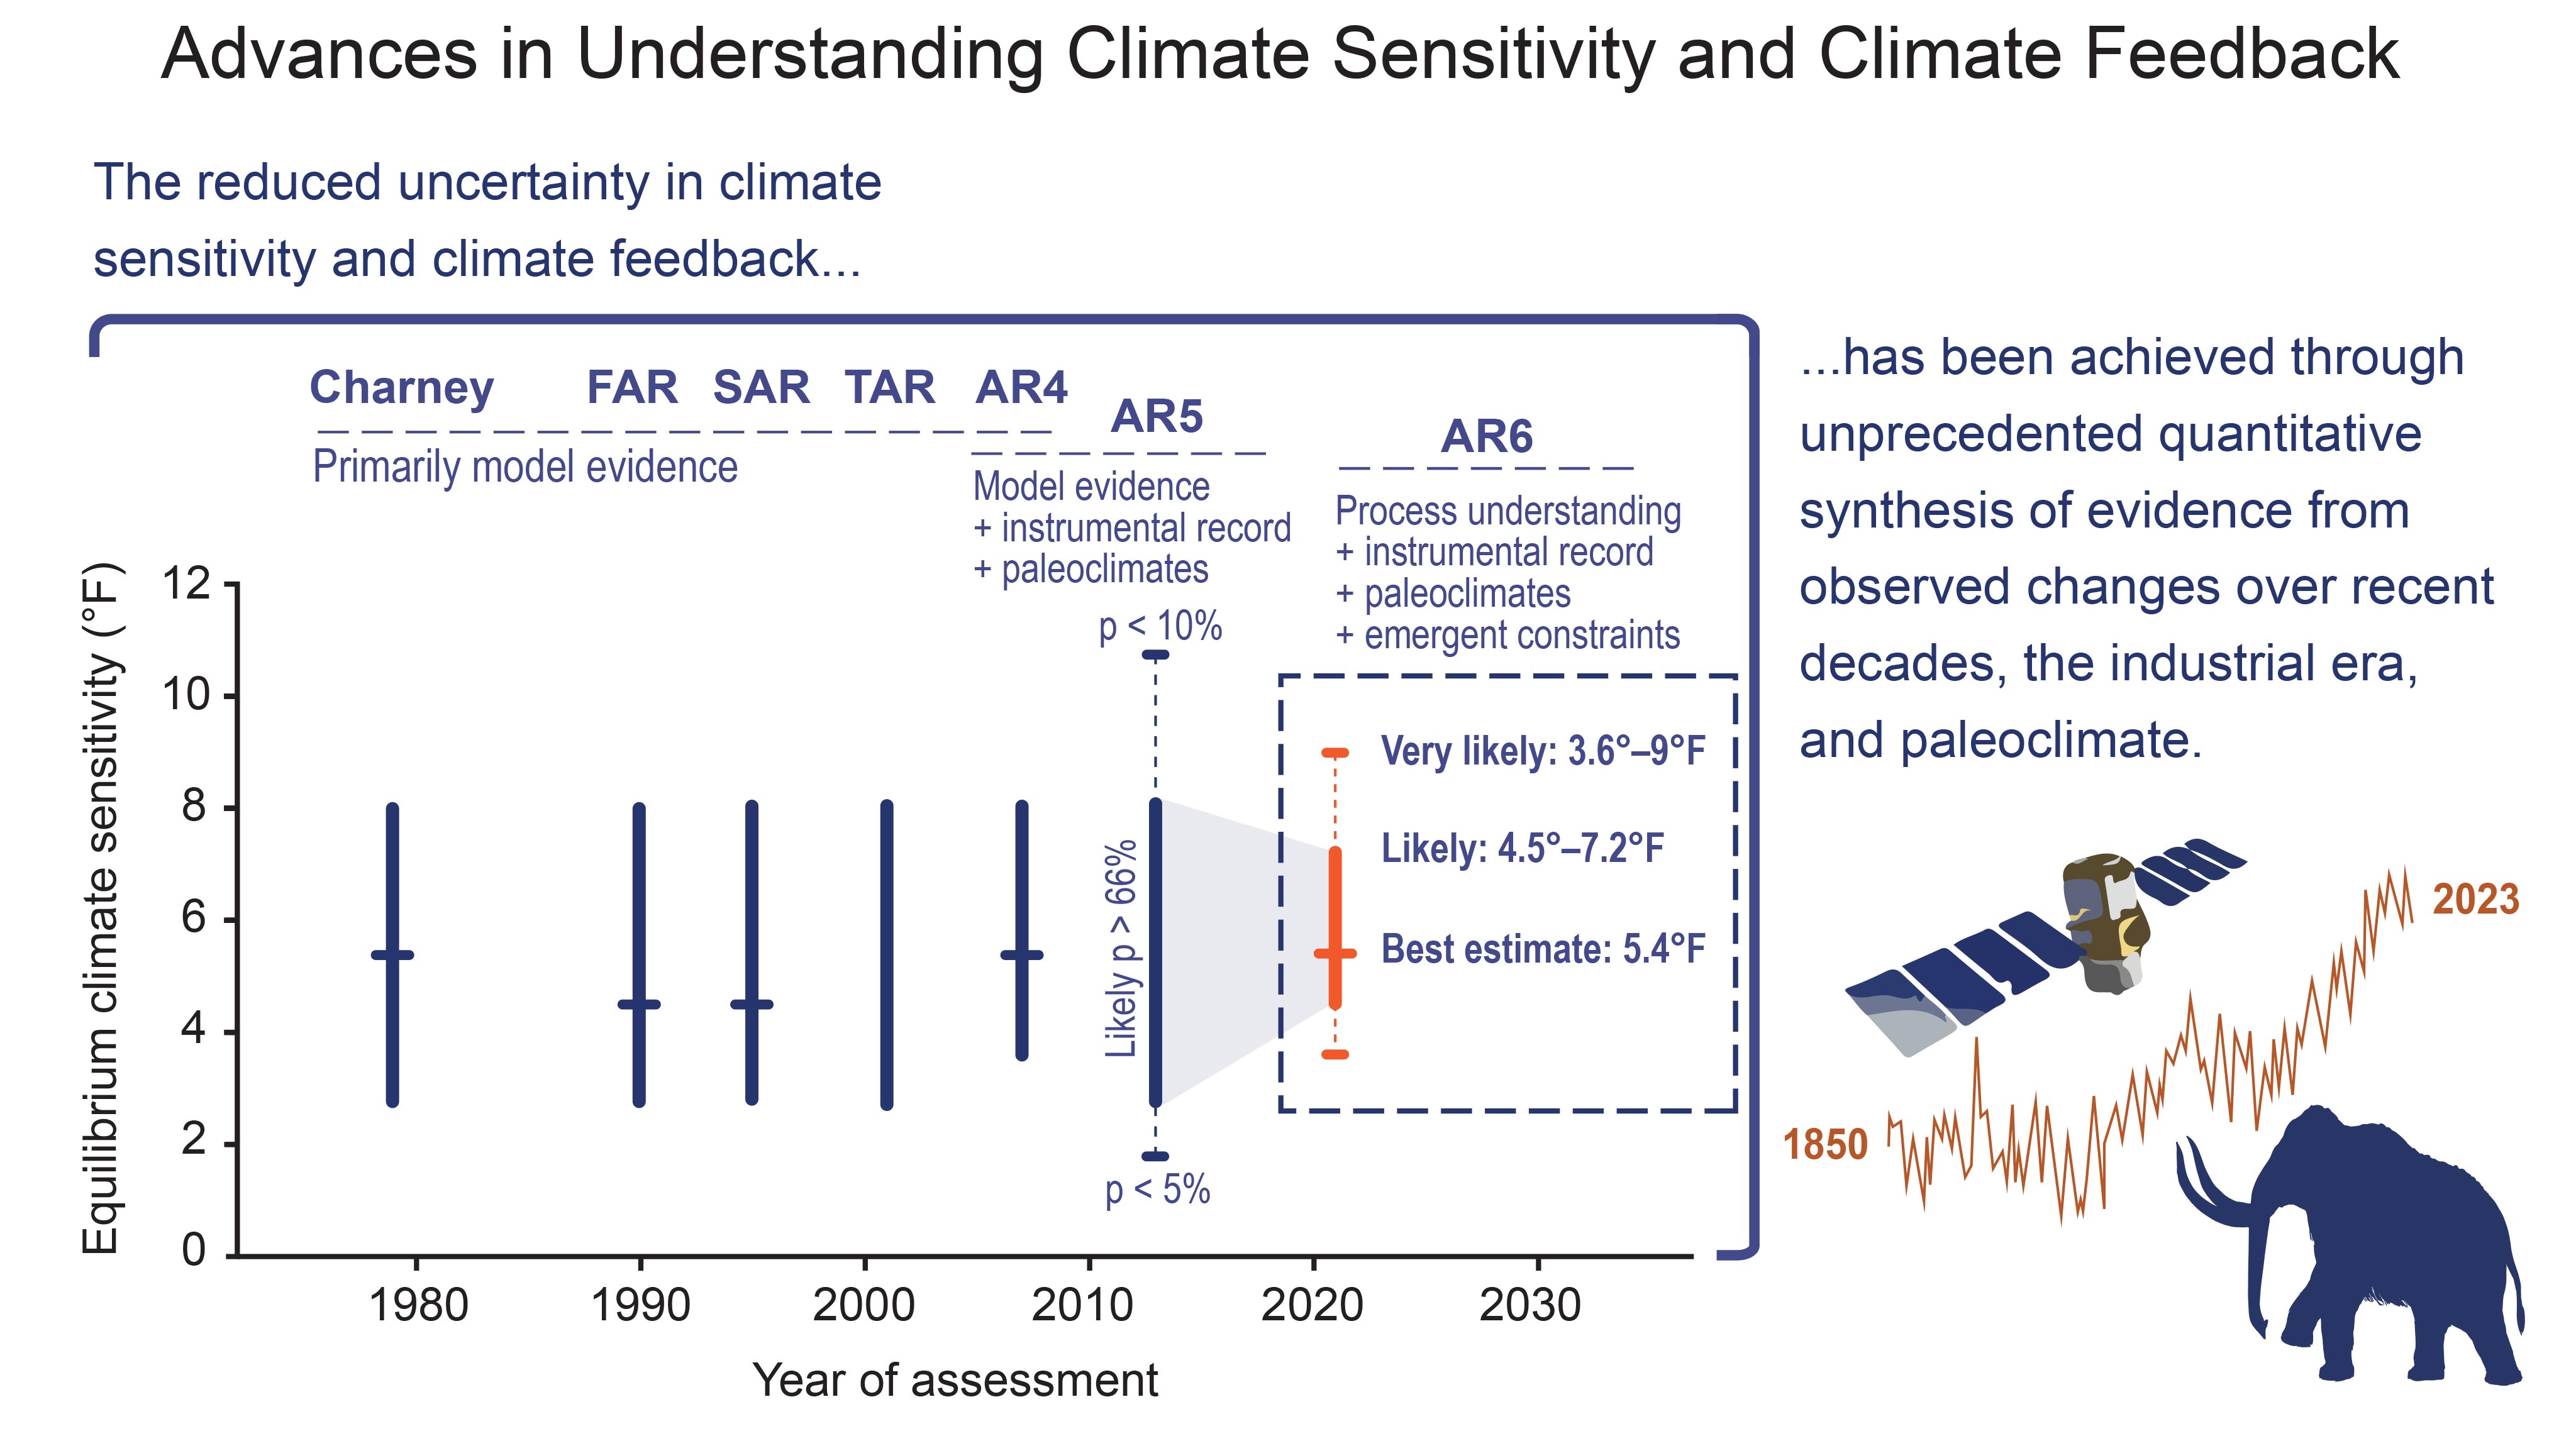 Advances in Understanding Climate Sensitivity and Climate Feedback